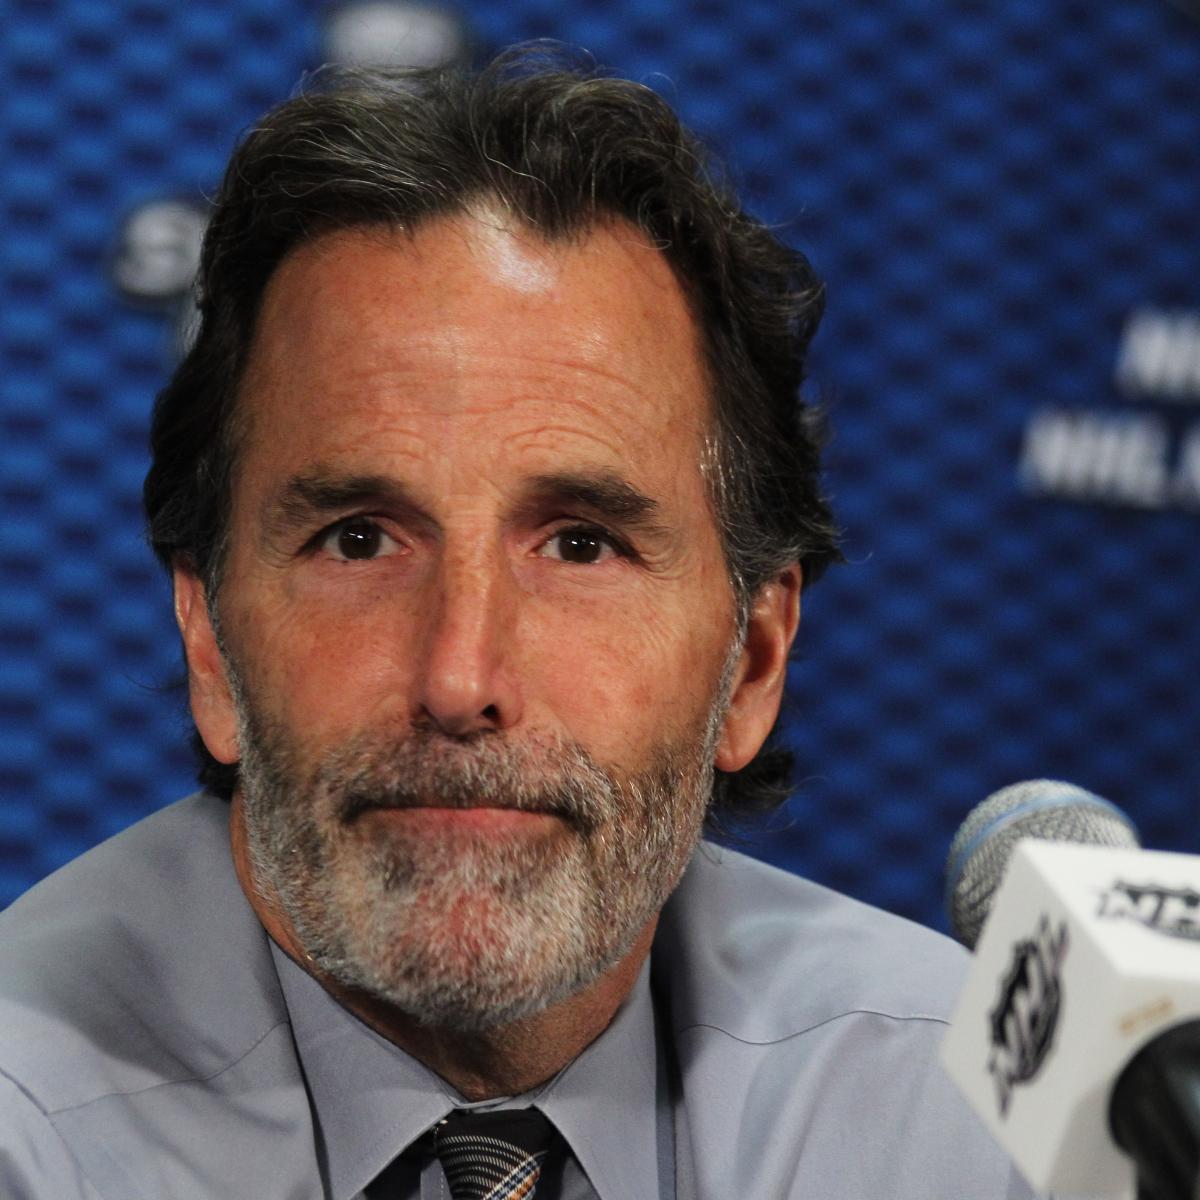 NY Rangers How Much Longer Does John Tortorella Have to Win a Cup in